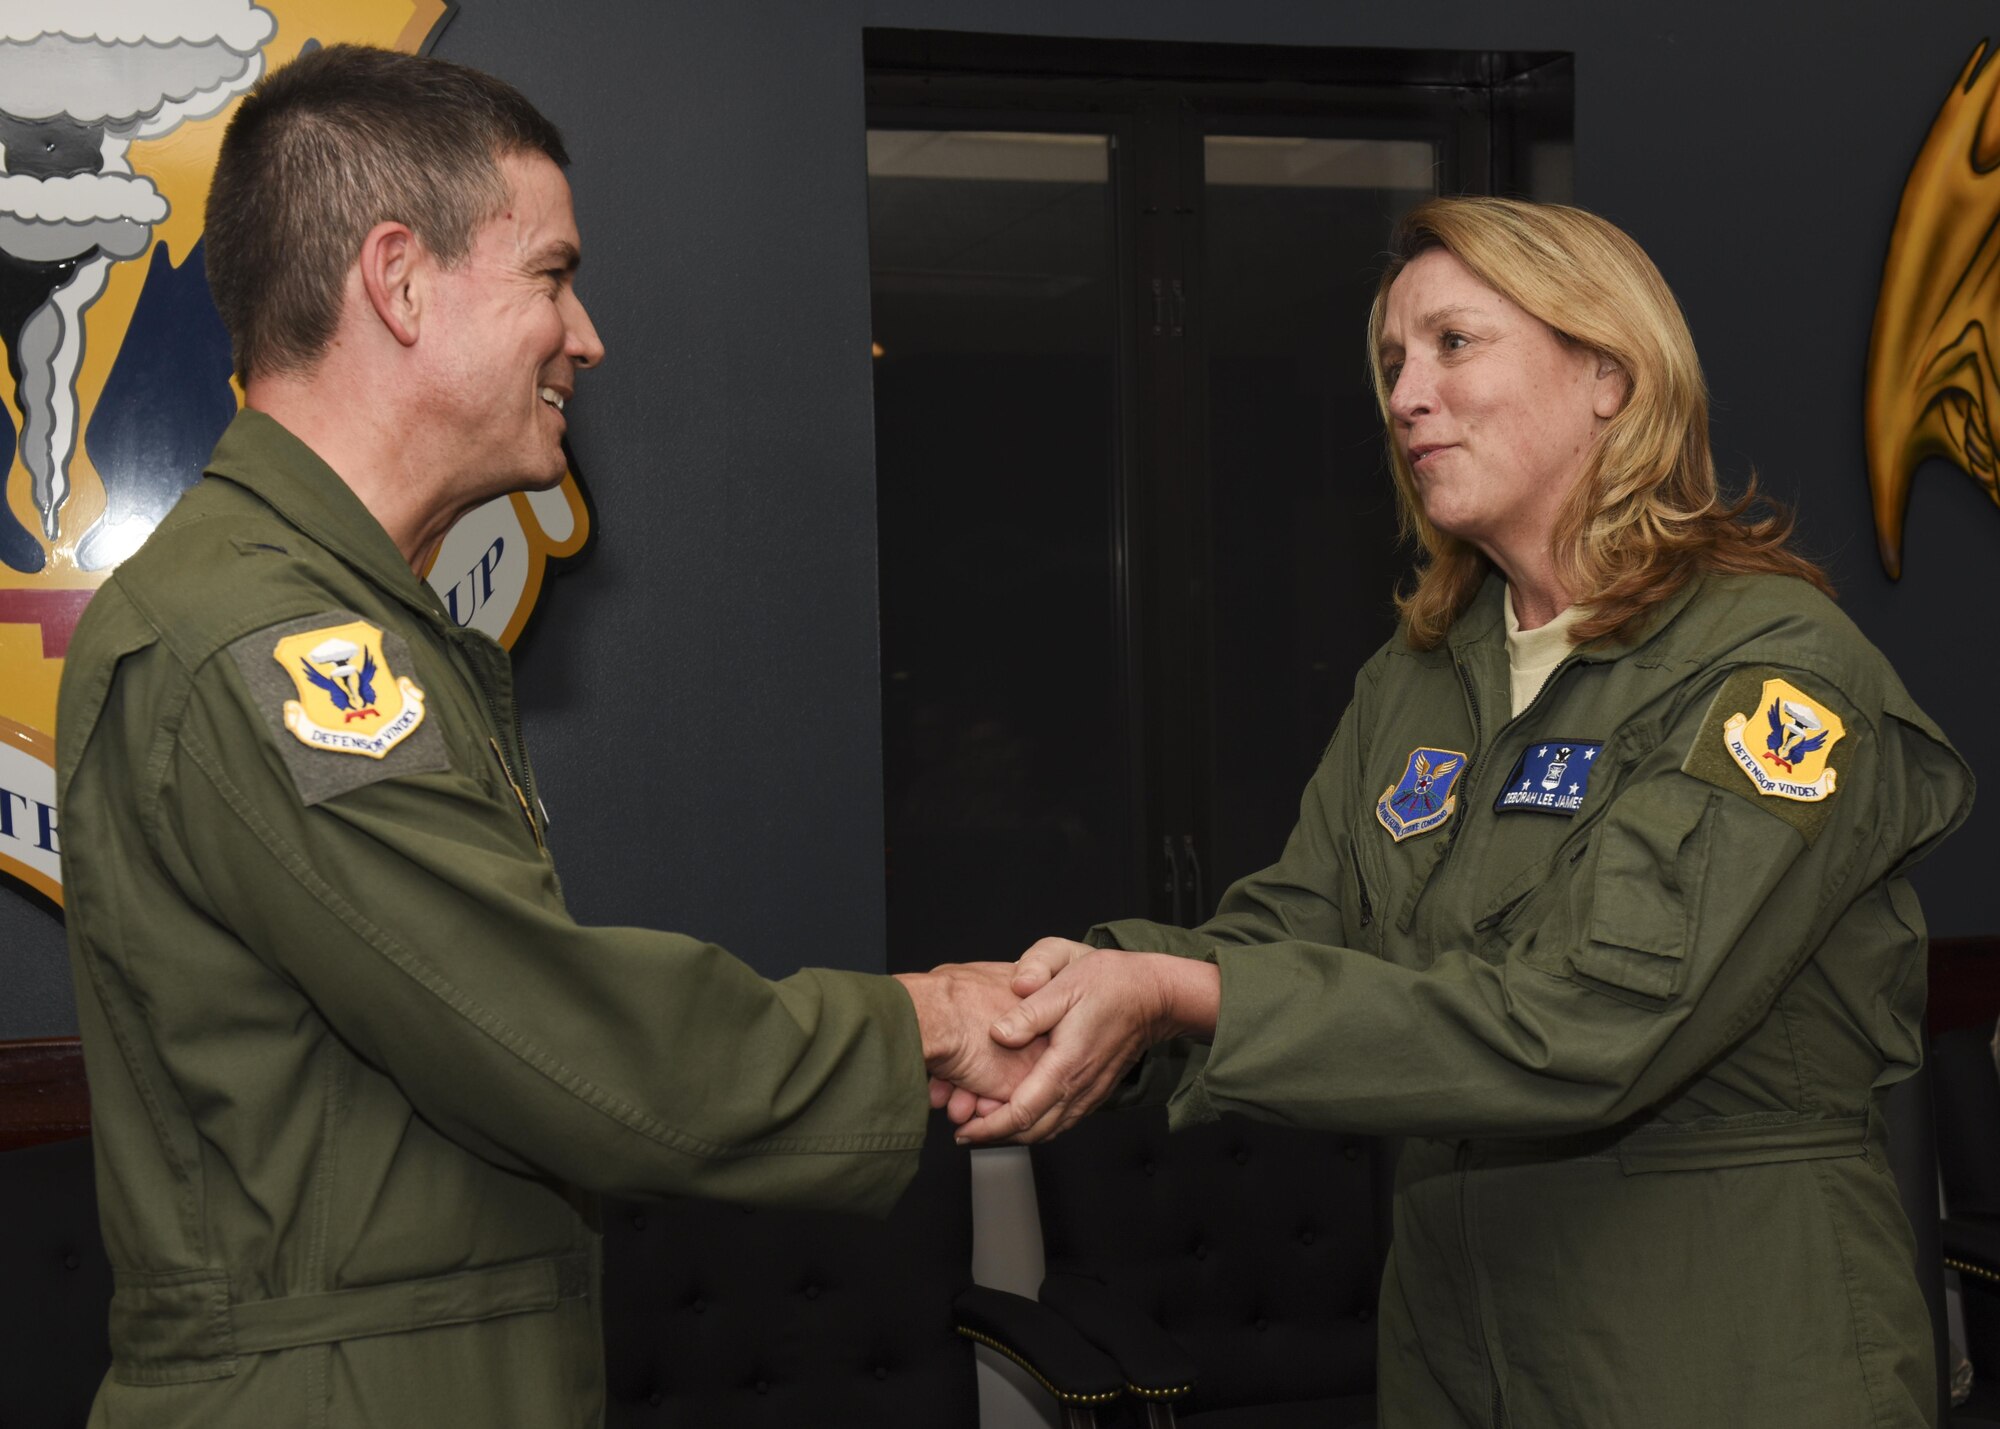 Secretary of the Air Force Deborah Lee James, right, receives a spirit coin from U.S. Air Force Brig. Gen. Paul W. Tibbets IV, the 509th Bomb Wing commander, at Whiteman Air Force Base, Mo., Nov. 8, 2016. During her post flight debrief, James observed first-hand the team work involved in ensuring each B-2 Spirit mission is conducted safely and successfully. (U.S. Air Force photo by Senior Airman Danielle Quilla)